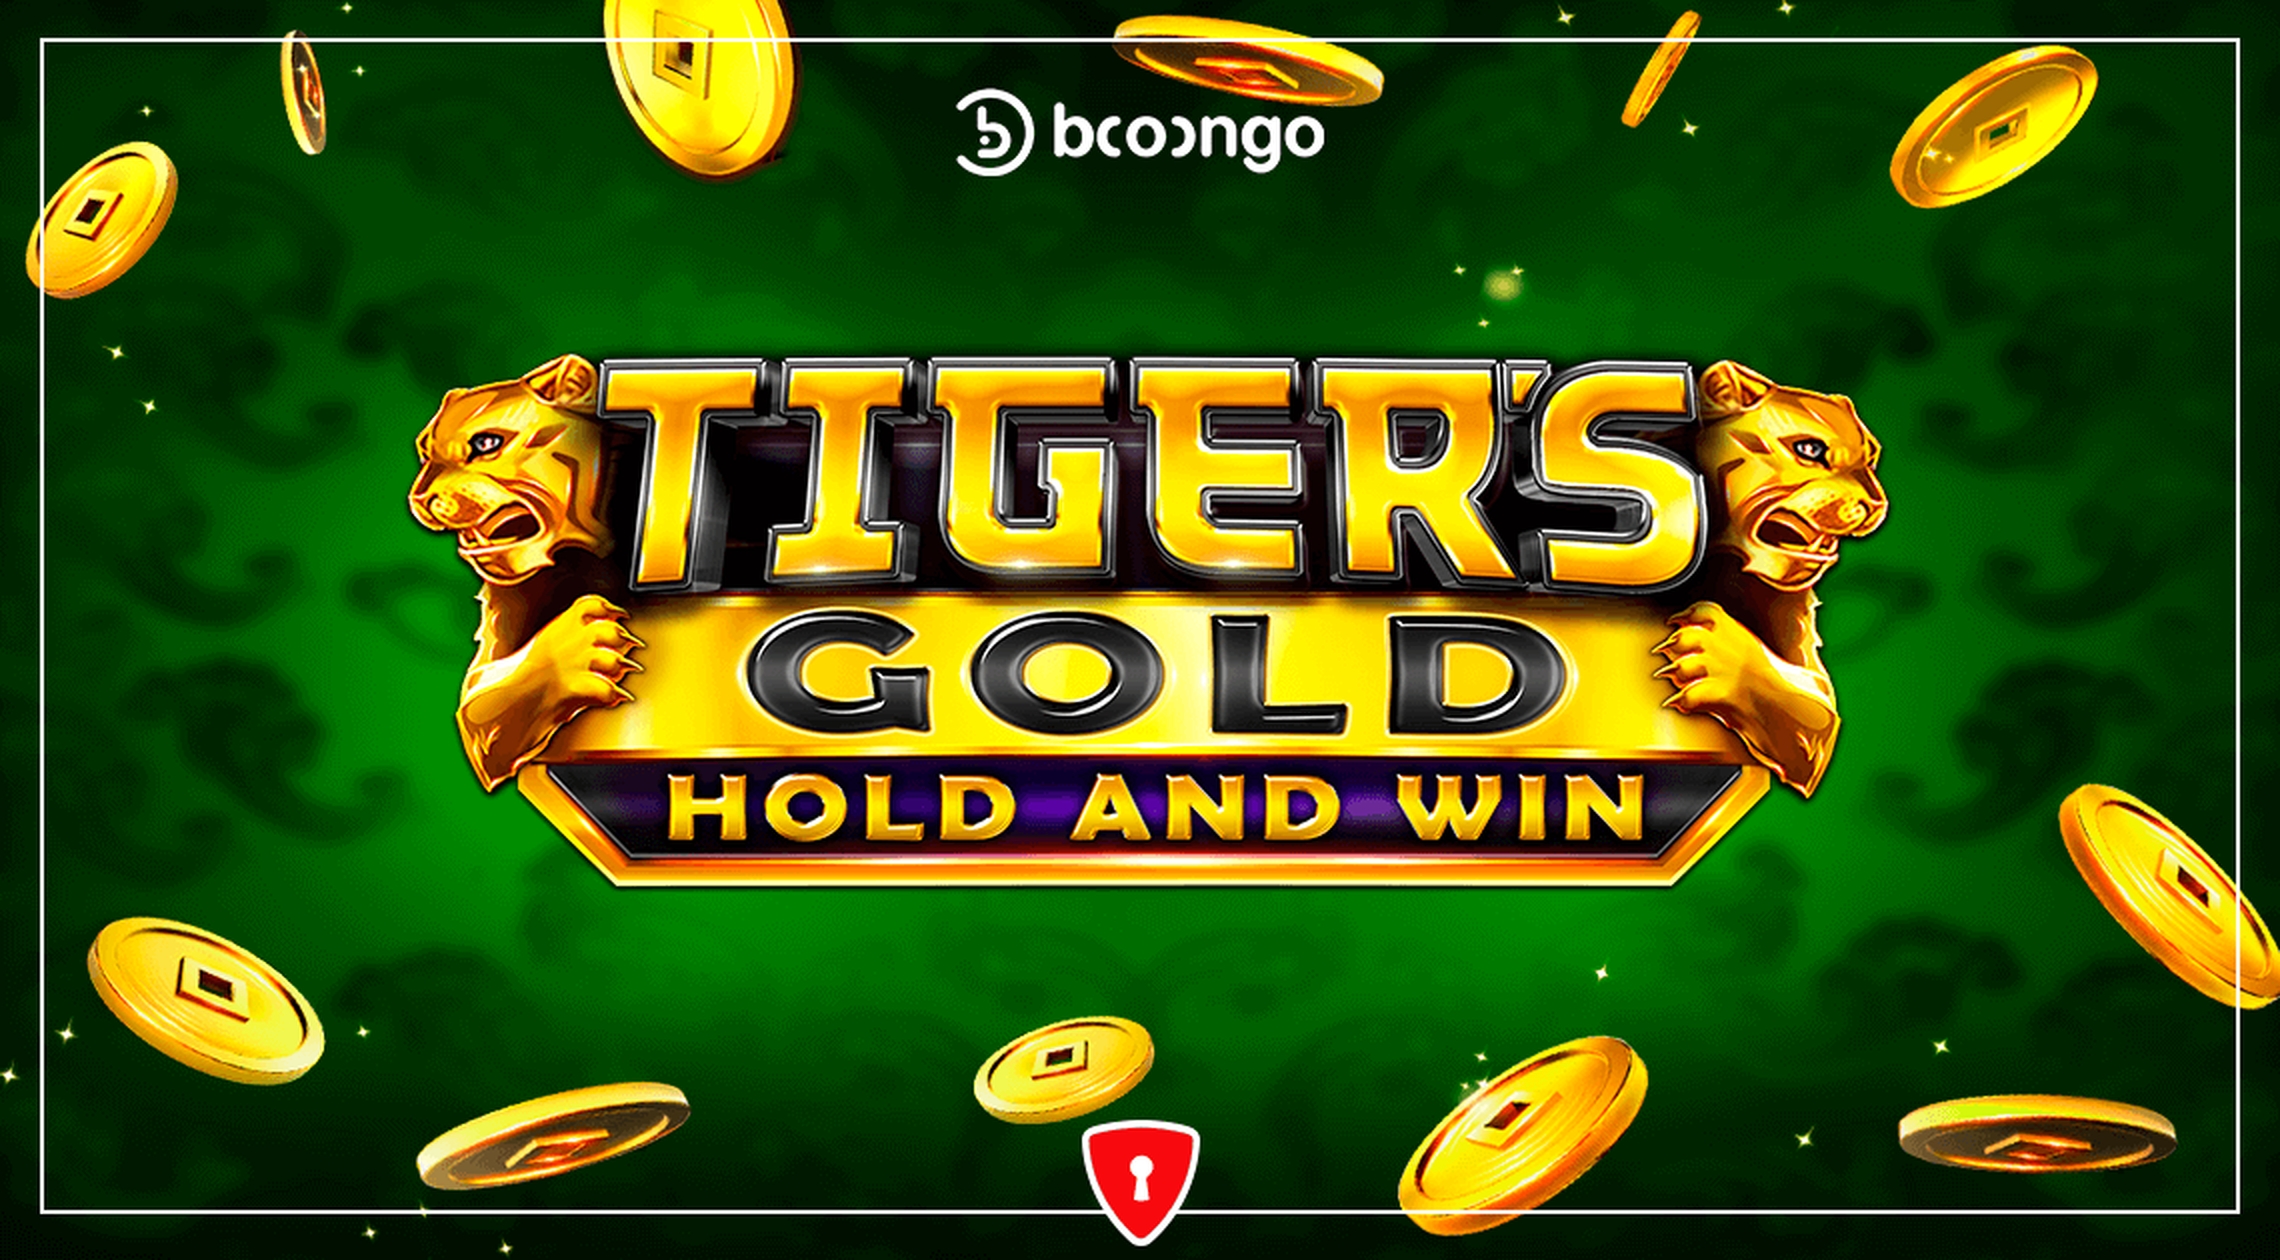 The Tiger's Gold Hold and Win Online Slot Demo Game by Booongo Gaming